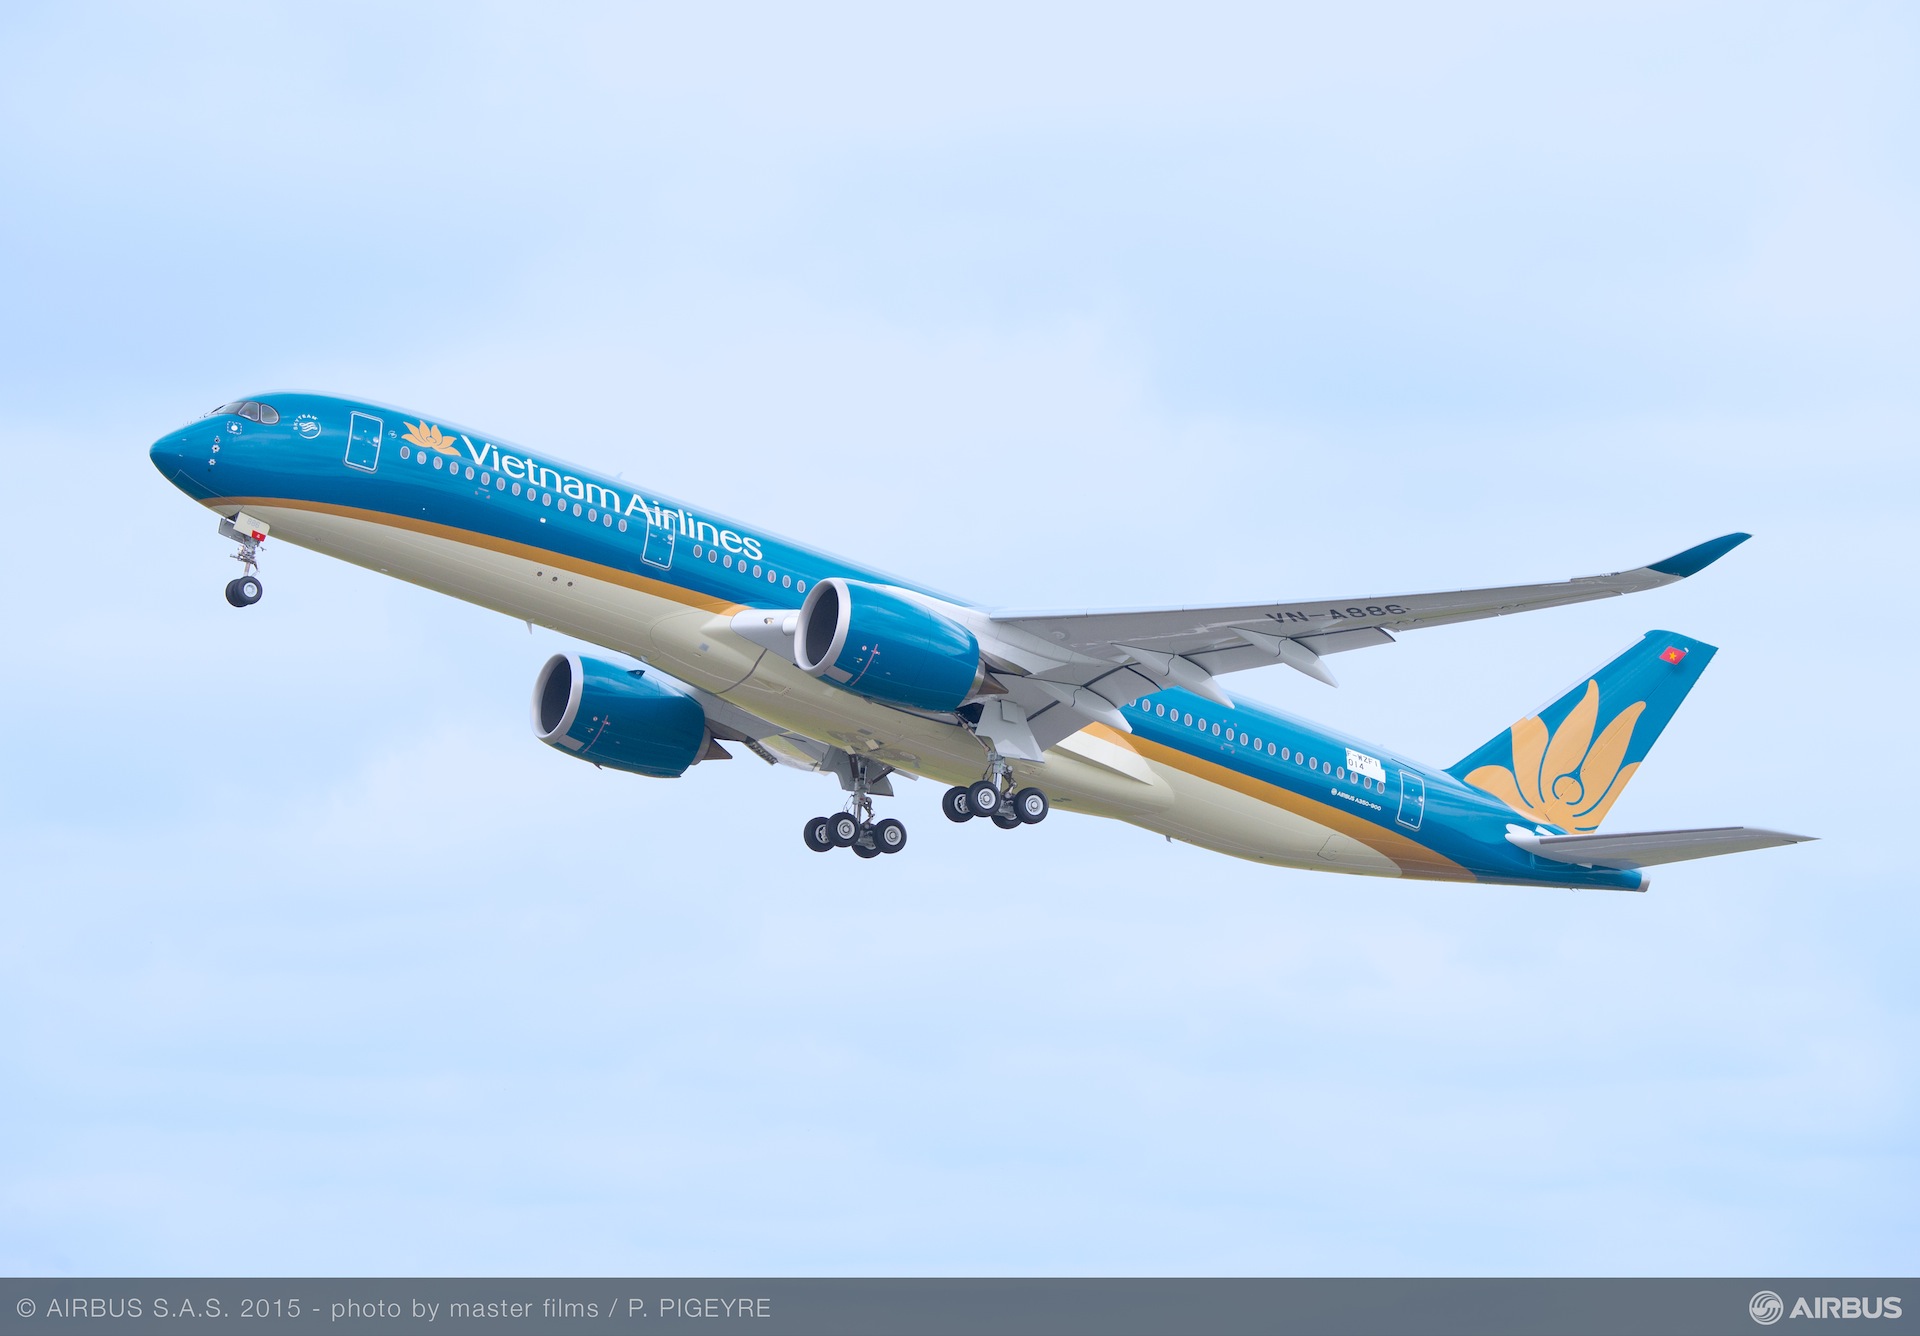 vietnam-airlines-first-airbus-a350-900-takes-off-bangalore-aviation